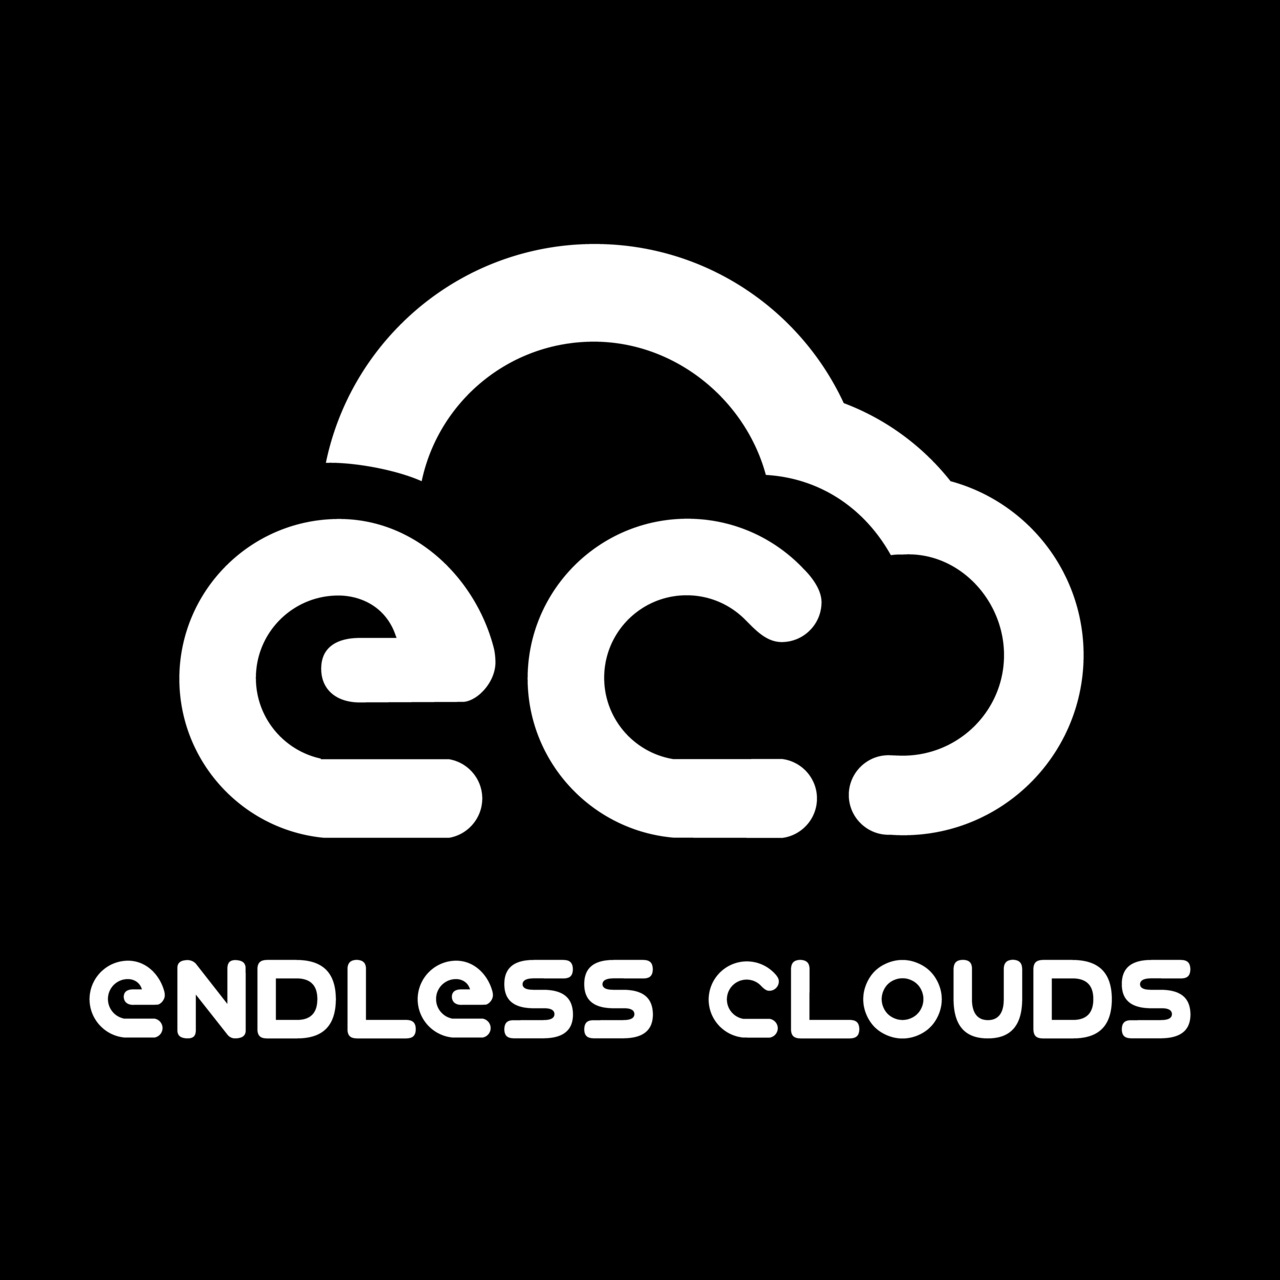 Endless Clouds Updates